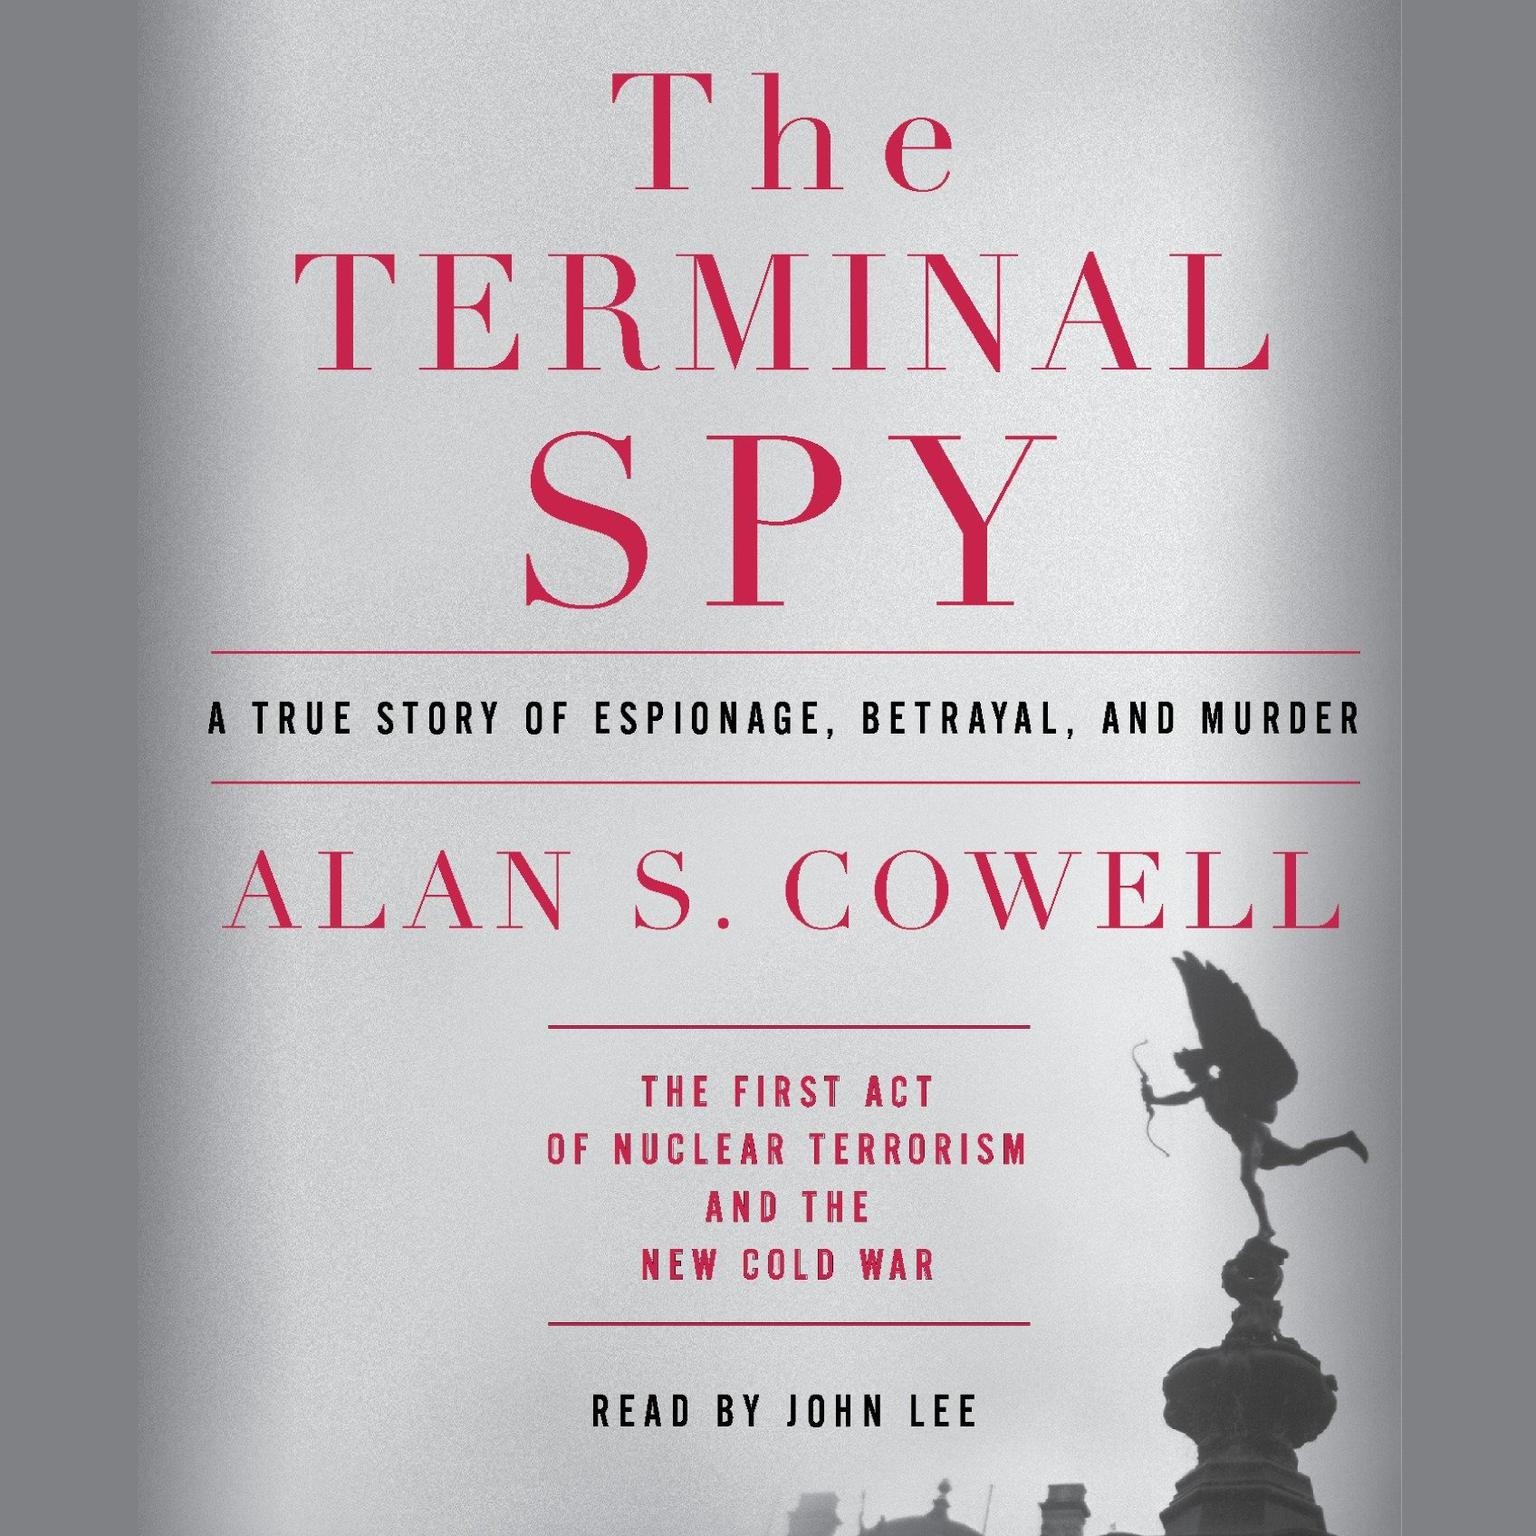 The Terminal Spy (Abridged): A True Story of Espionage, Betrayal and Murder Audiobook, by Alan S. Cowell